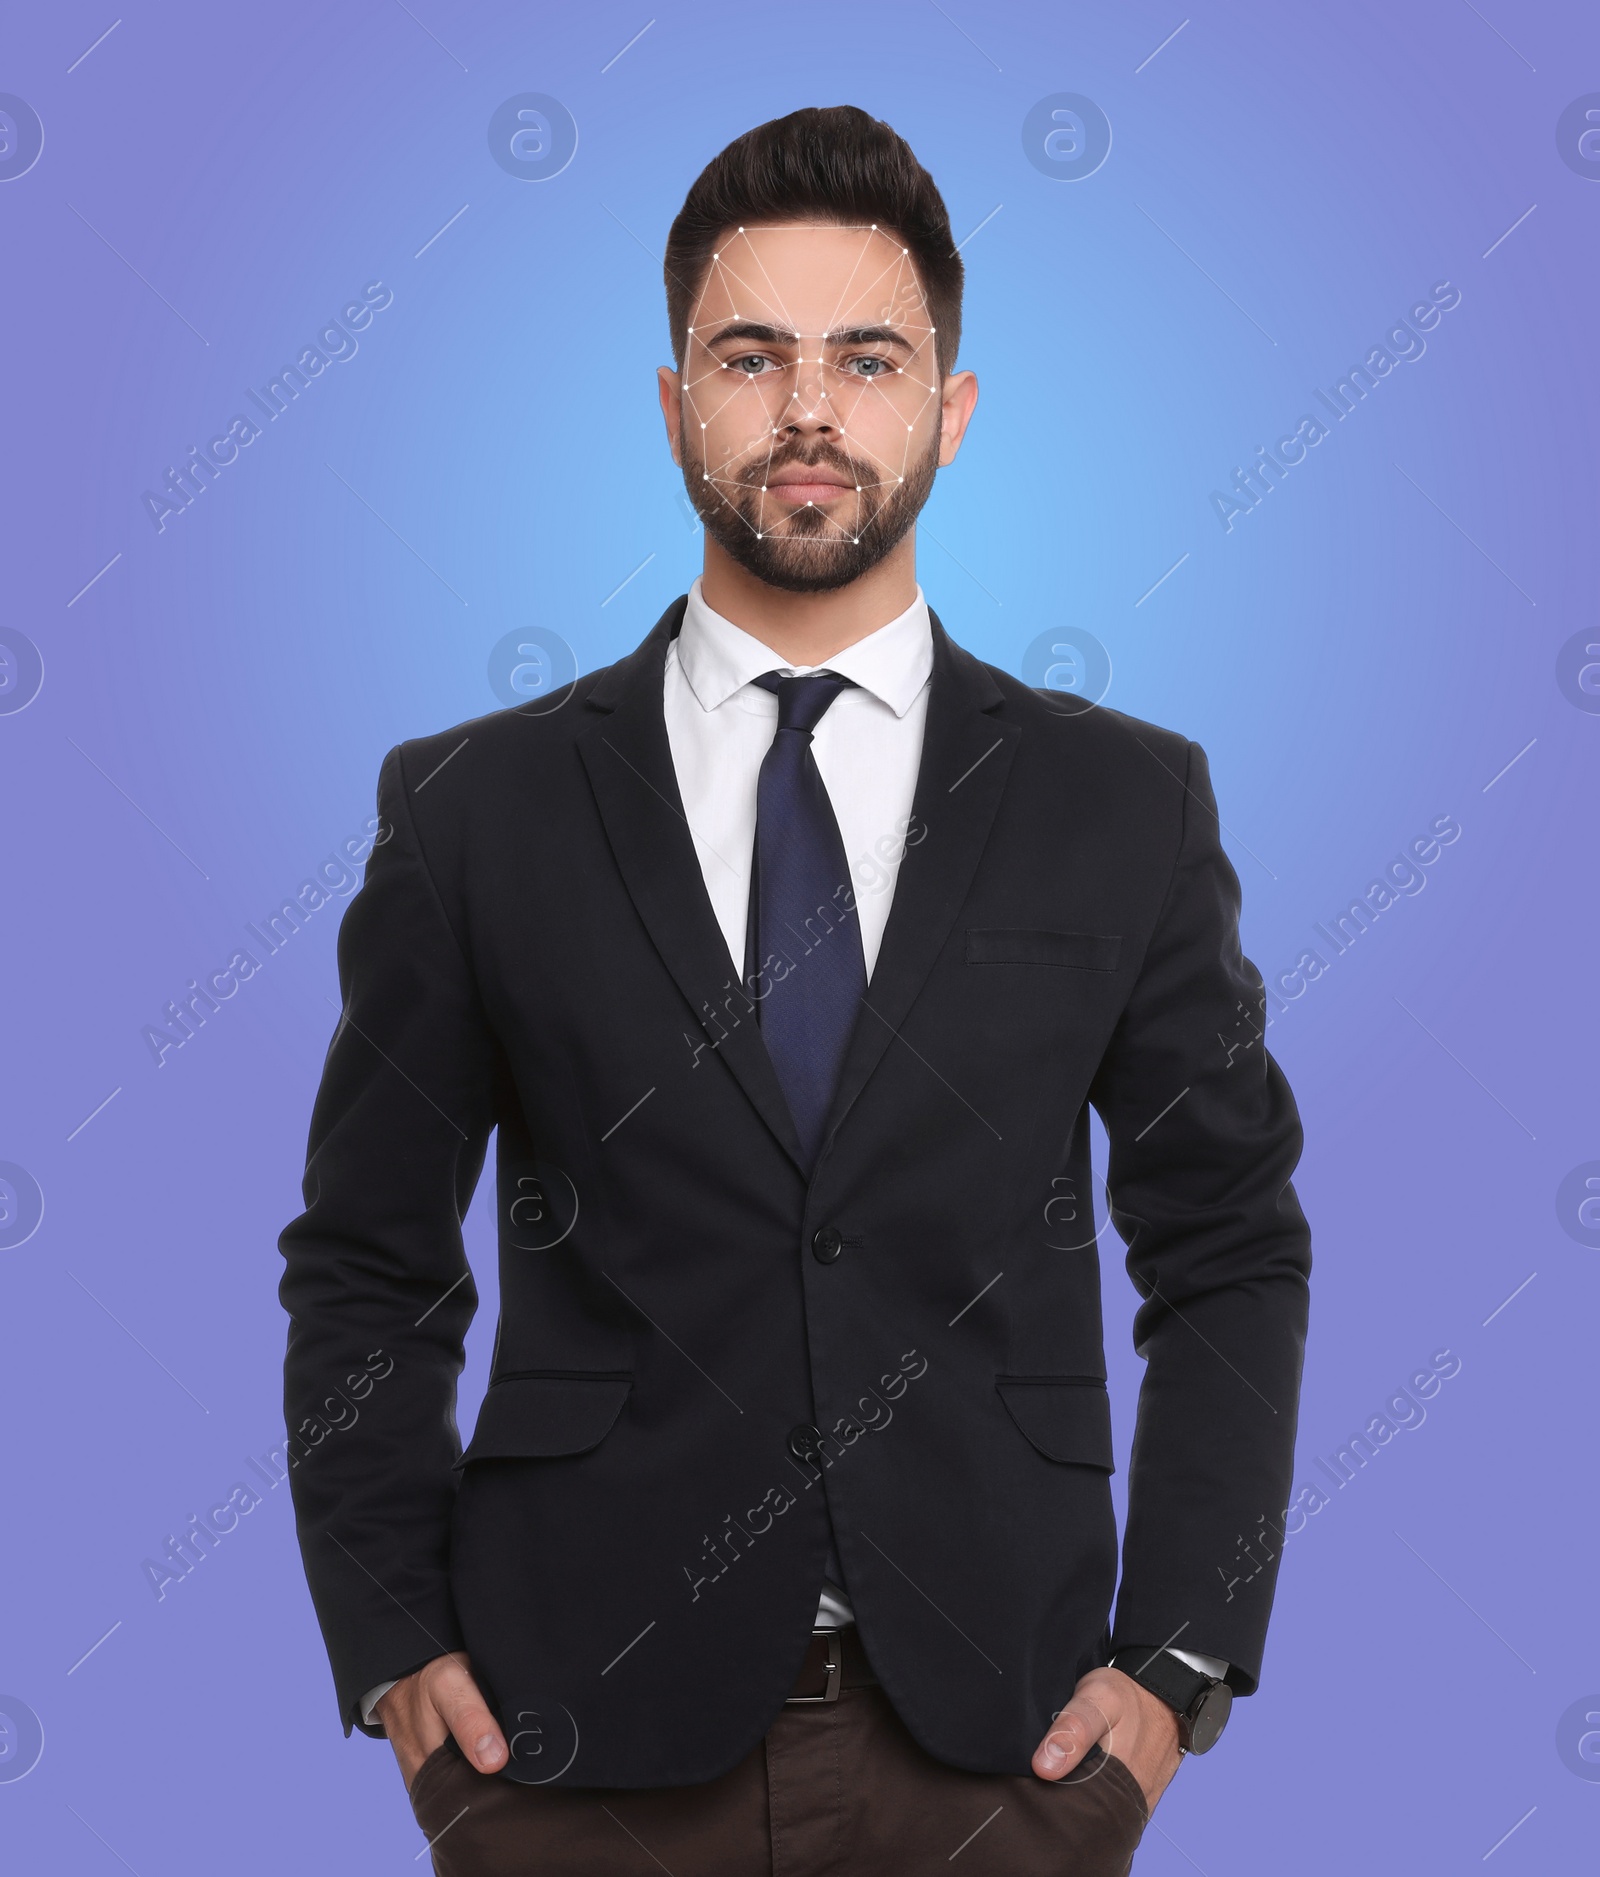 Image of Facial recognition system. Businessman with digital biometric grid on blue background